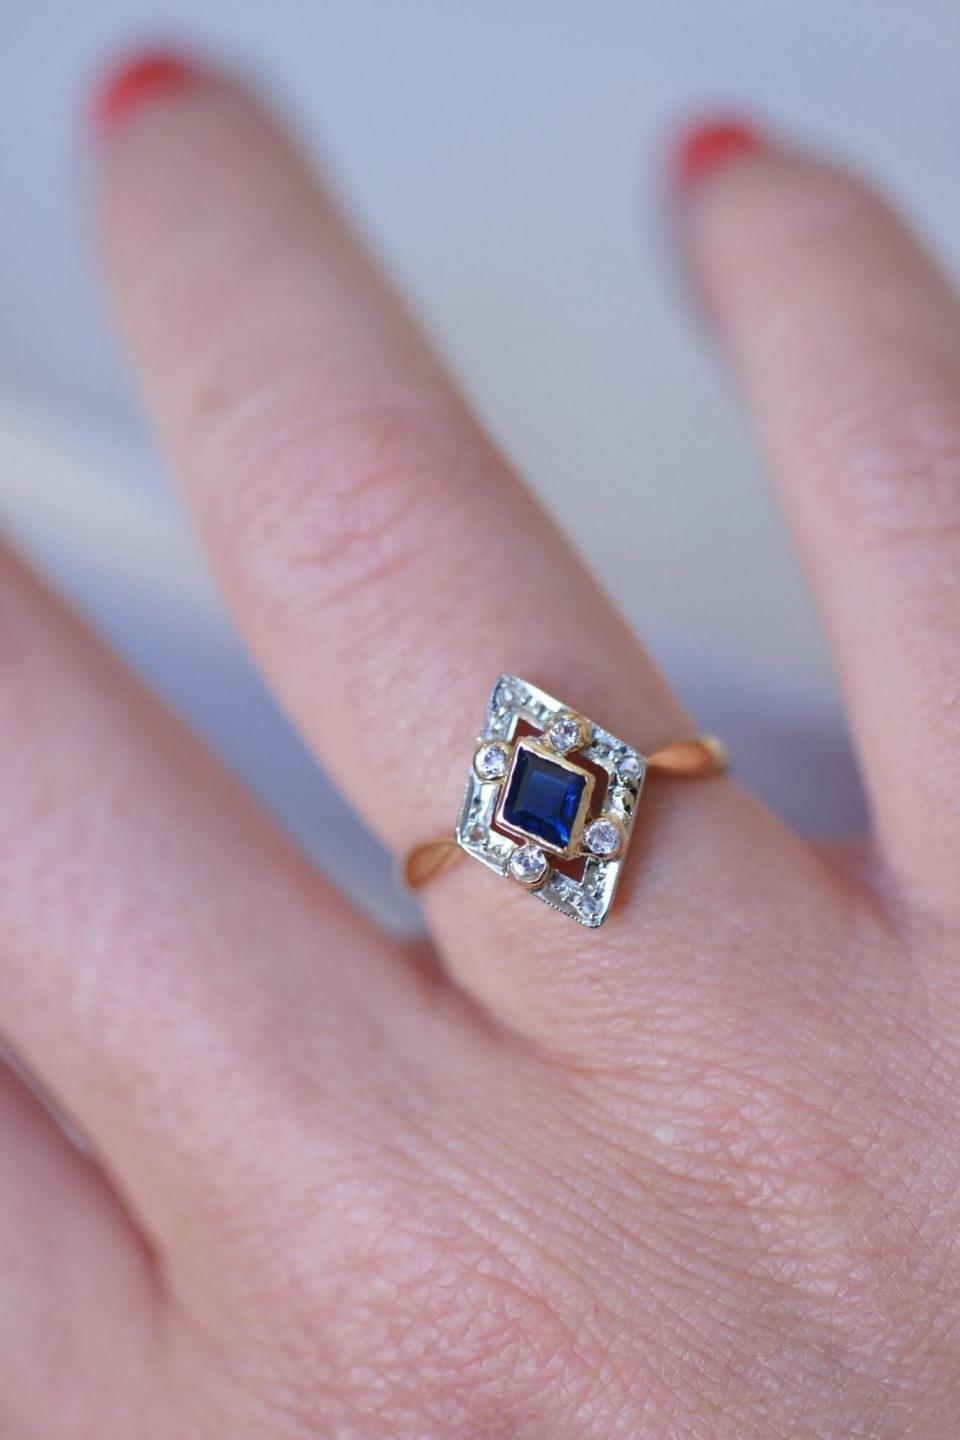 French Art Deco Sapphire Ring